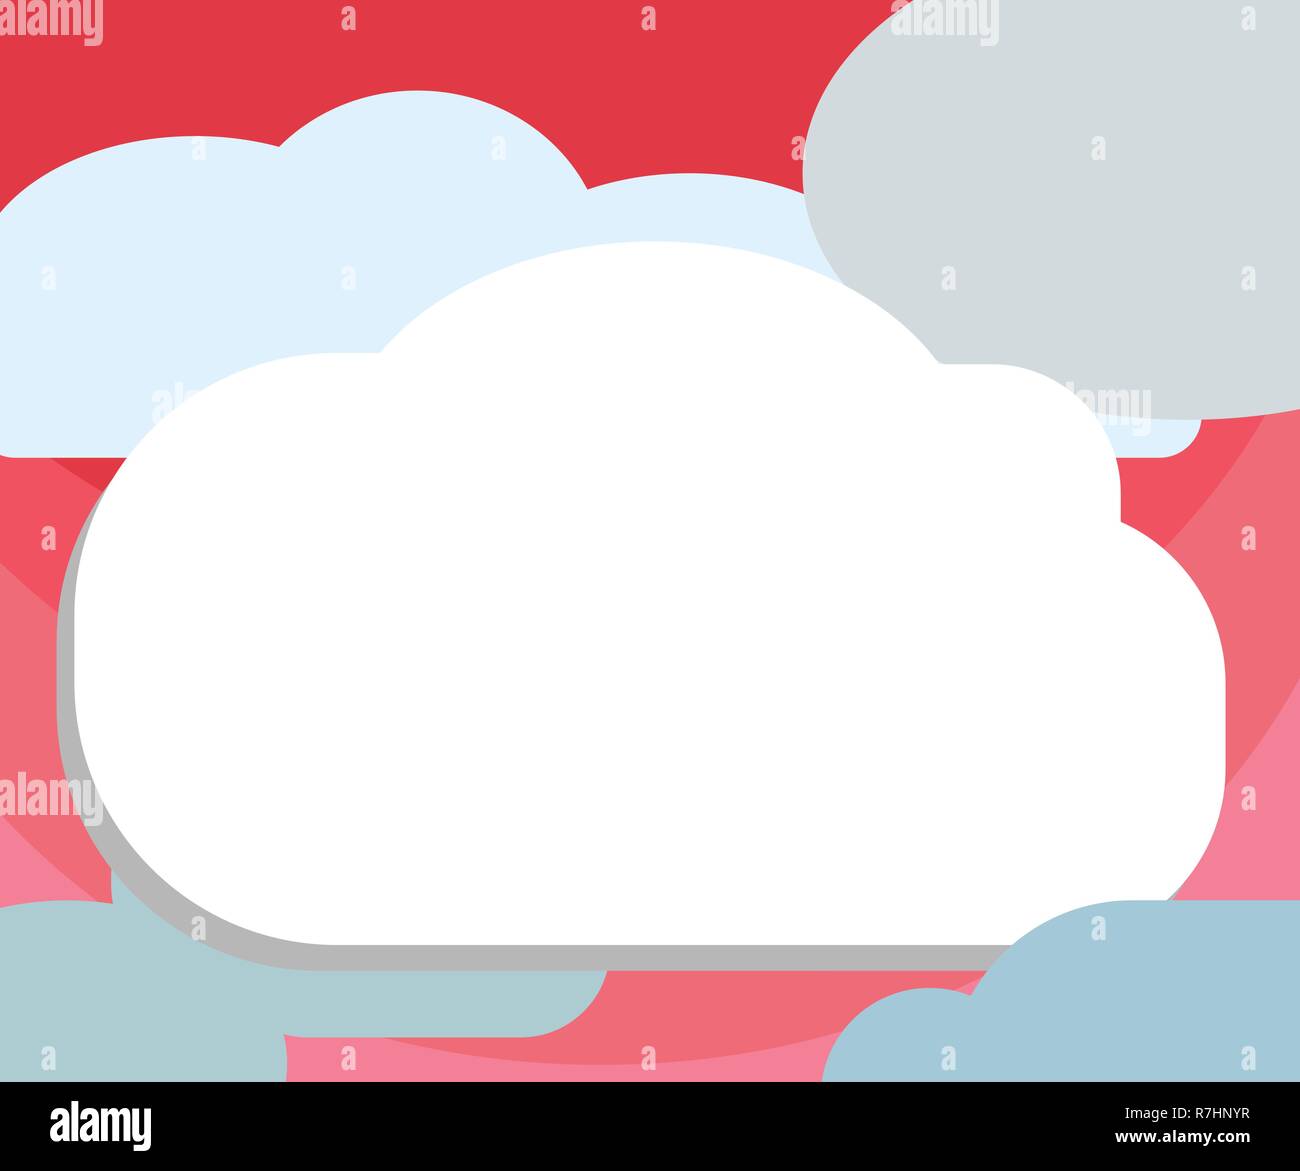 Flat design business Vector Illustration Empty template esp isolated Minimalist graphic layout template for advertising. Blank Halftone Cloud Shape Em Stock Vector